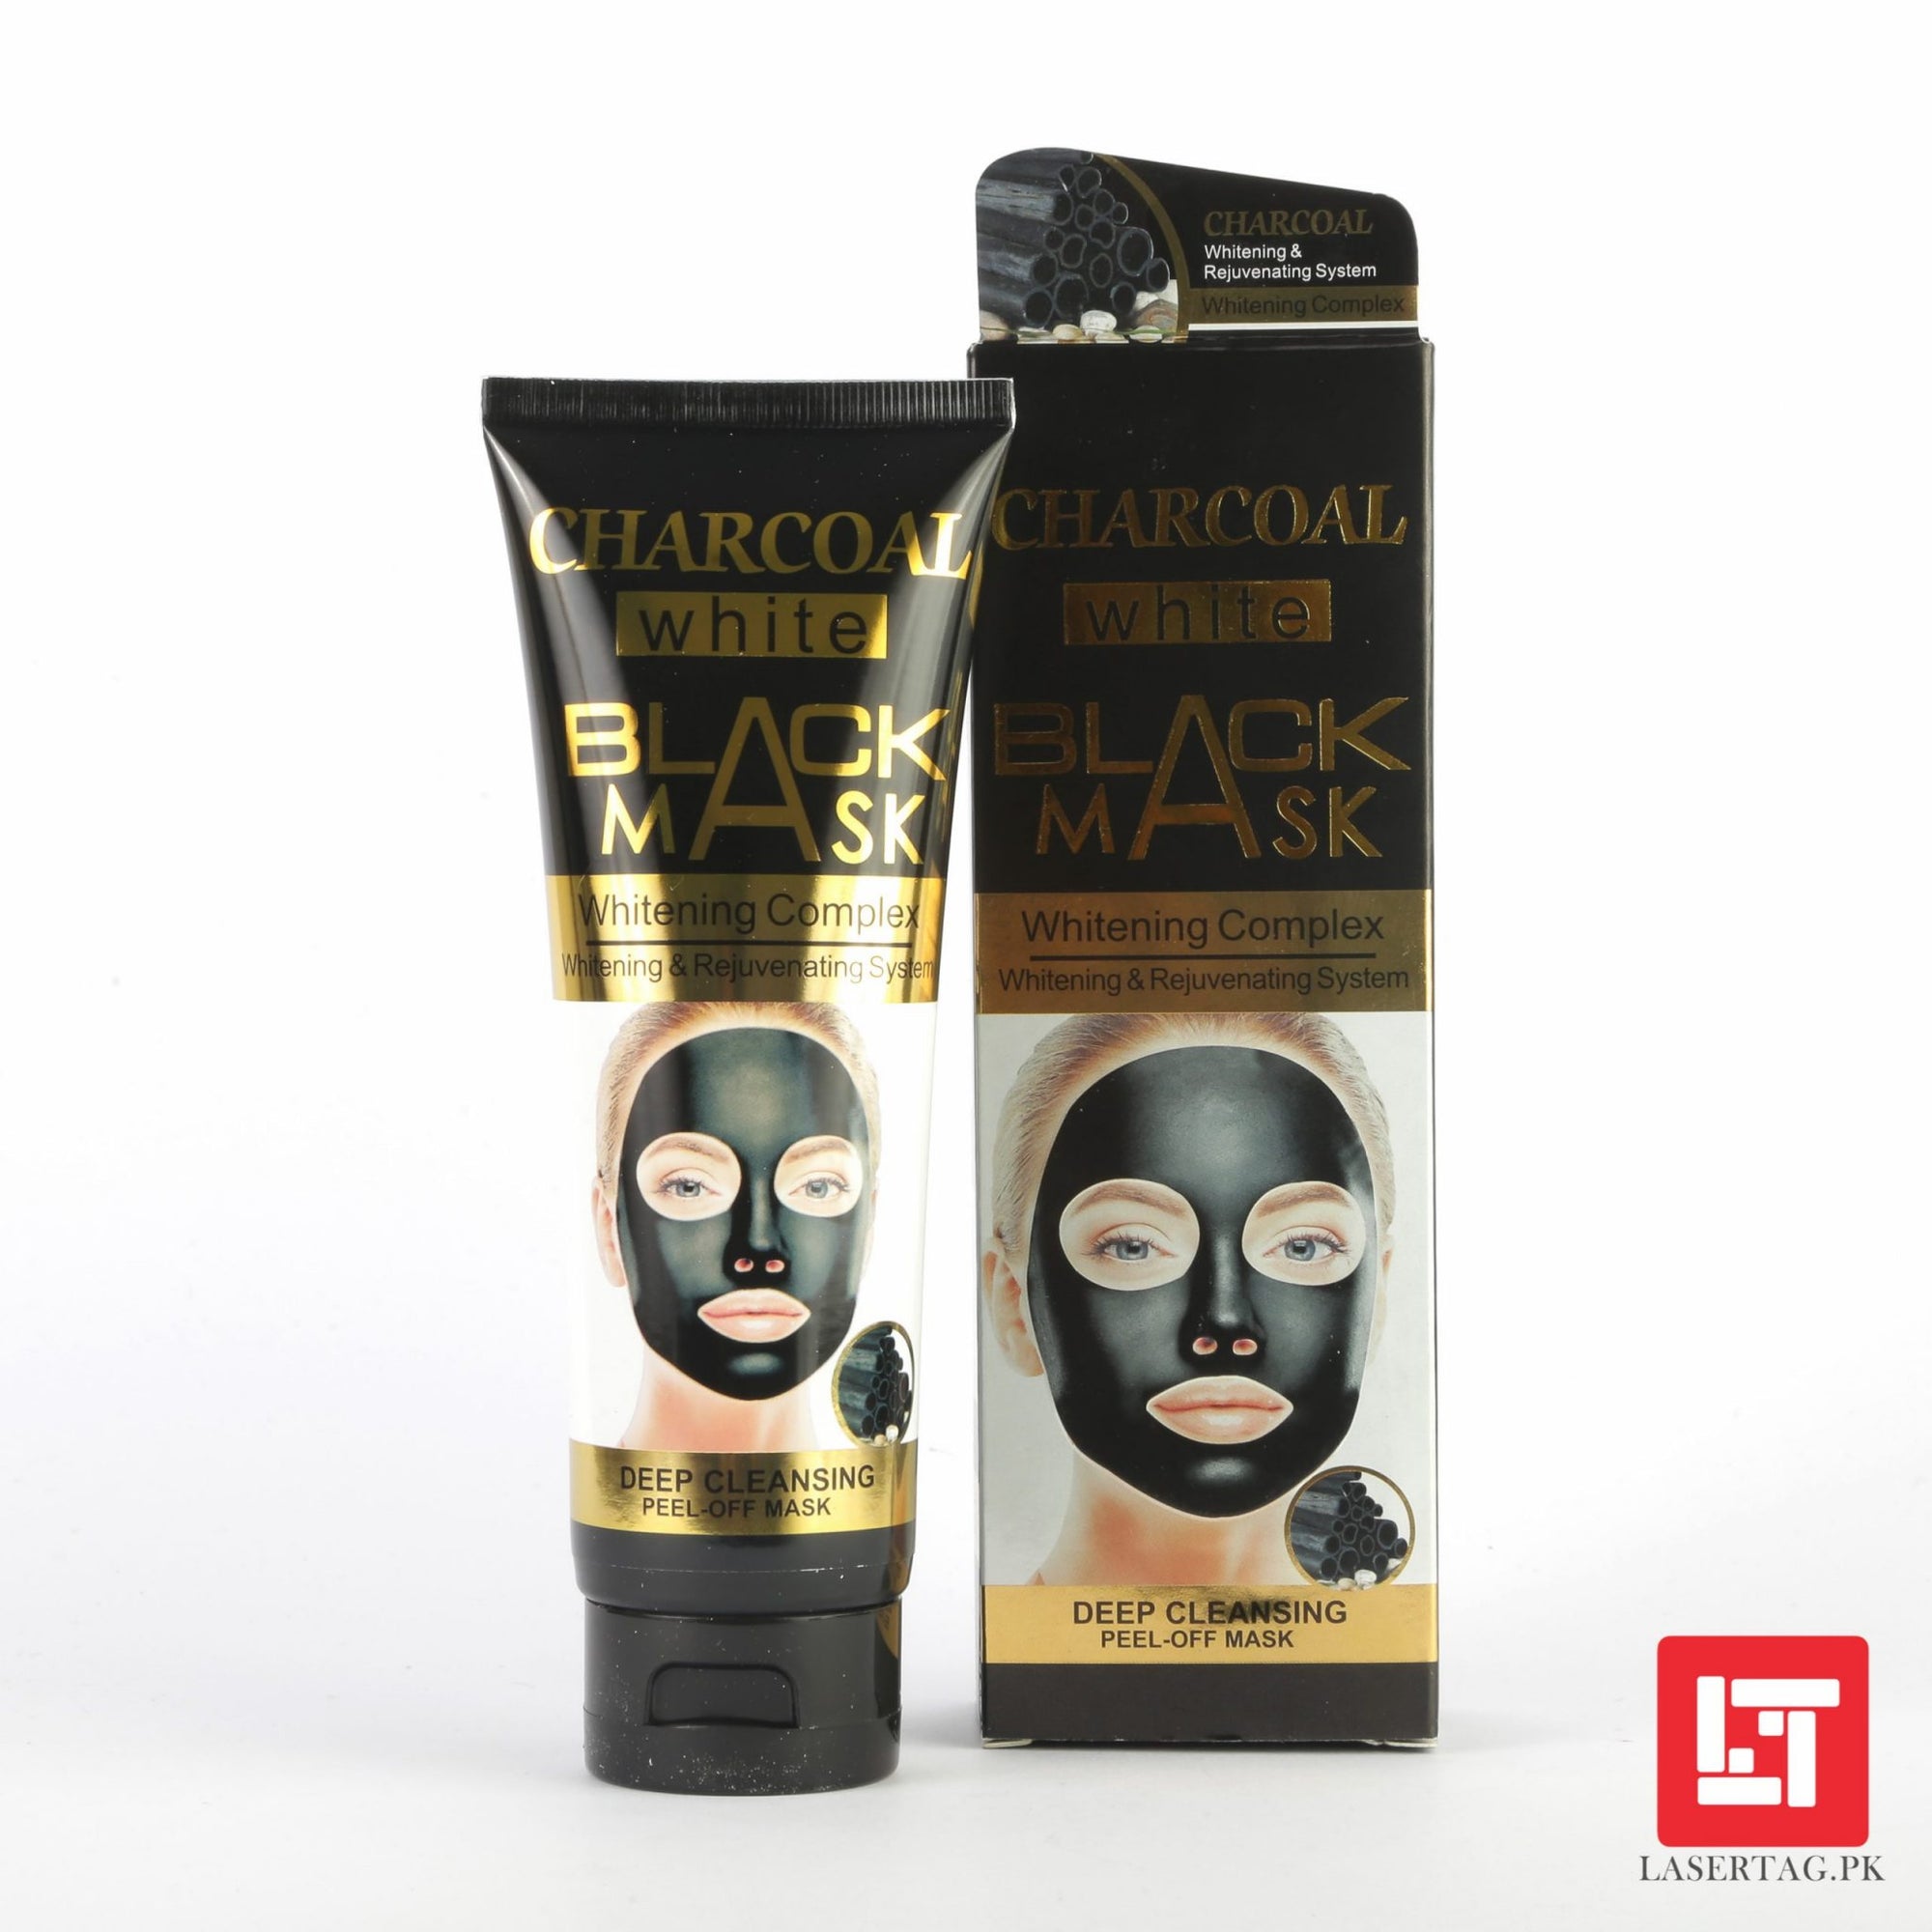 Wokali Charcoal Black Mask Whitening Complex Deep Cleansing Peel Off Mask freeshipping - lasertag.pk